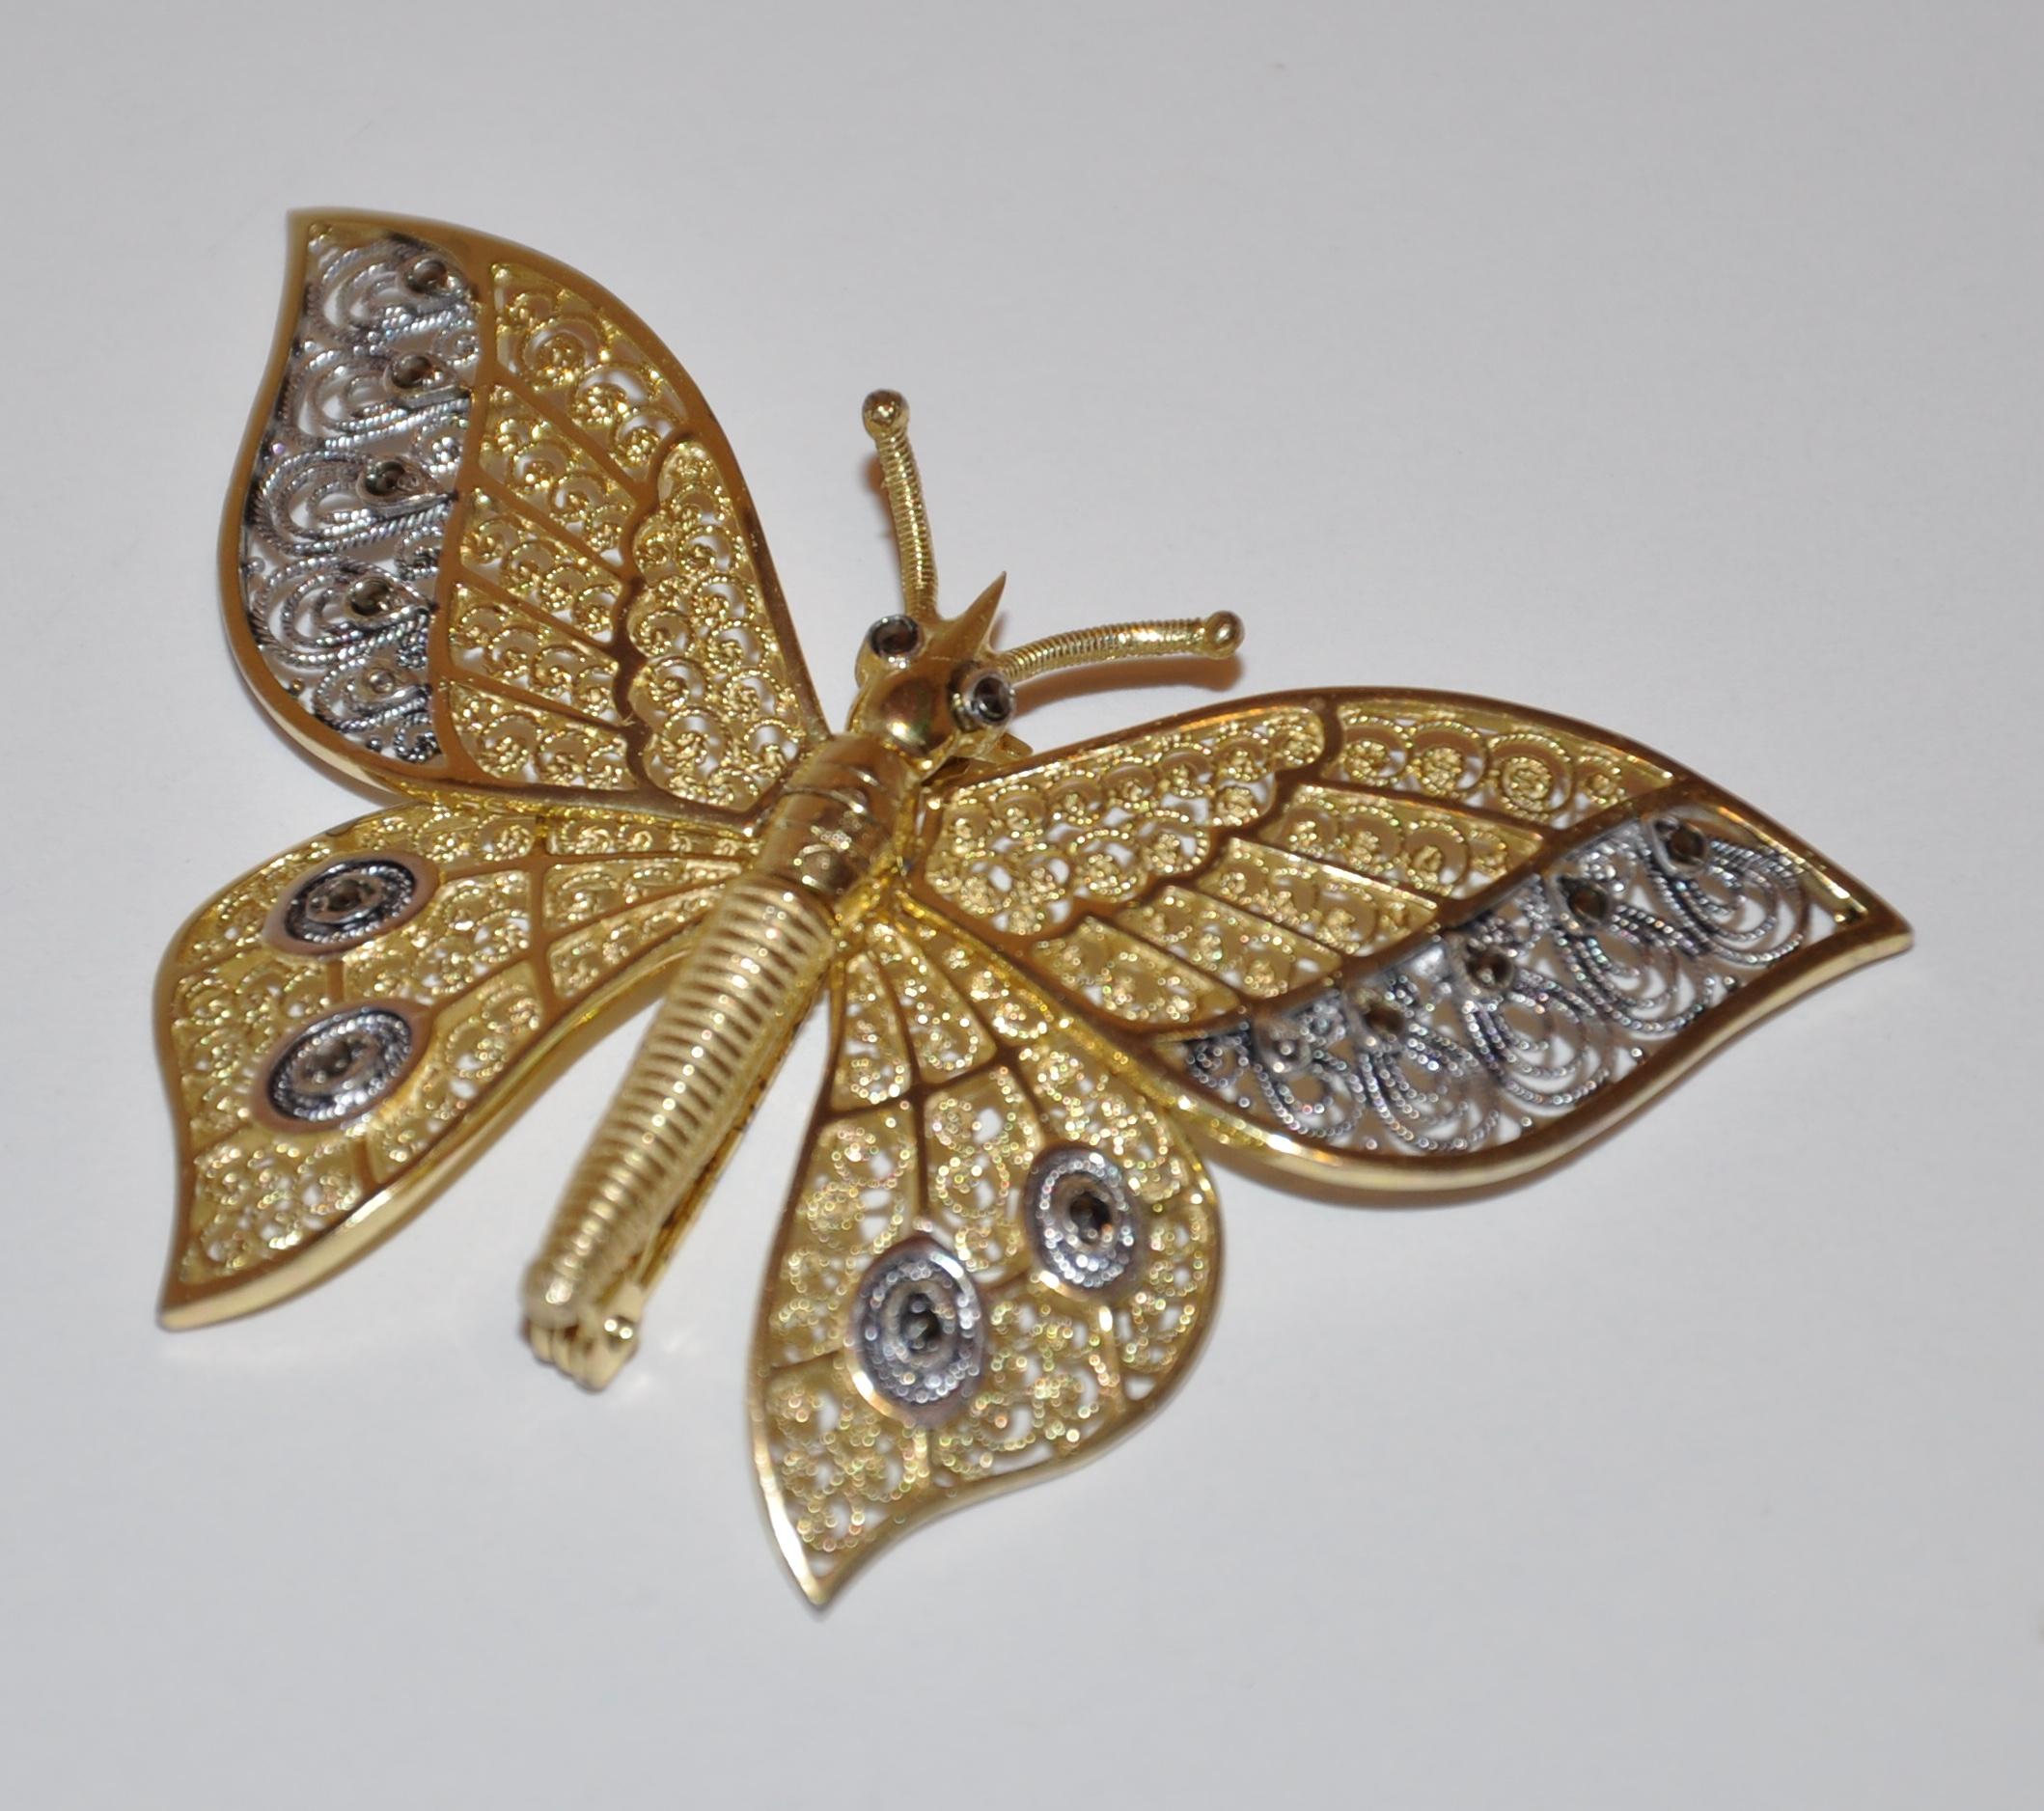        Alice Caviness wonderfully detailed sterling silver with gold overlay butterfly brooch has all four wings moveable if desired. Filigree handwork and made in Germany. The upper wings  measures 2 3/8 inches in width, with the smaller wings